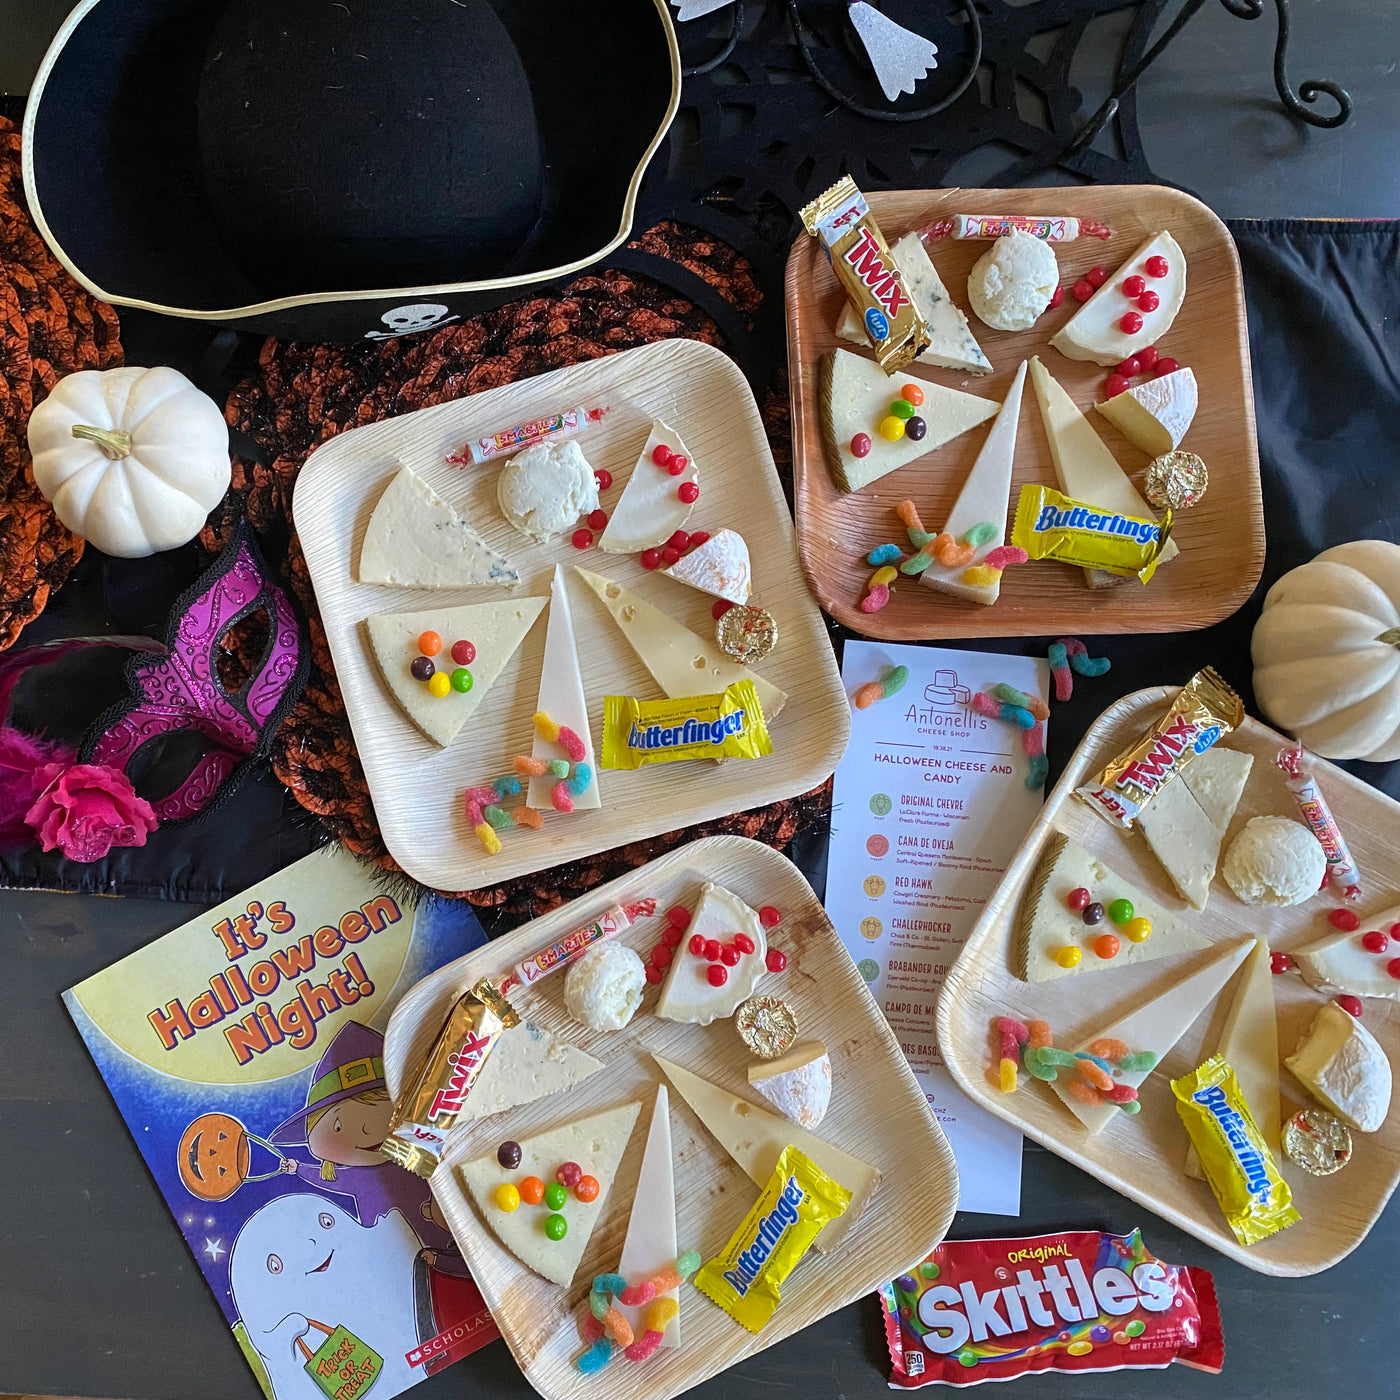 four cheese plates with 7 slices of cheese and multiple different types of halloween candy including skittles.